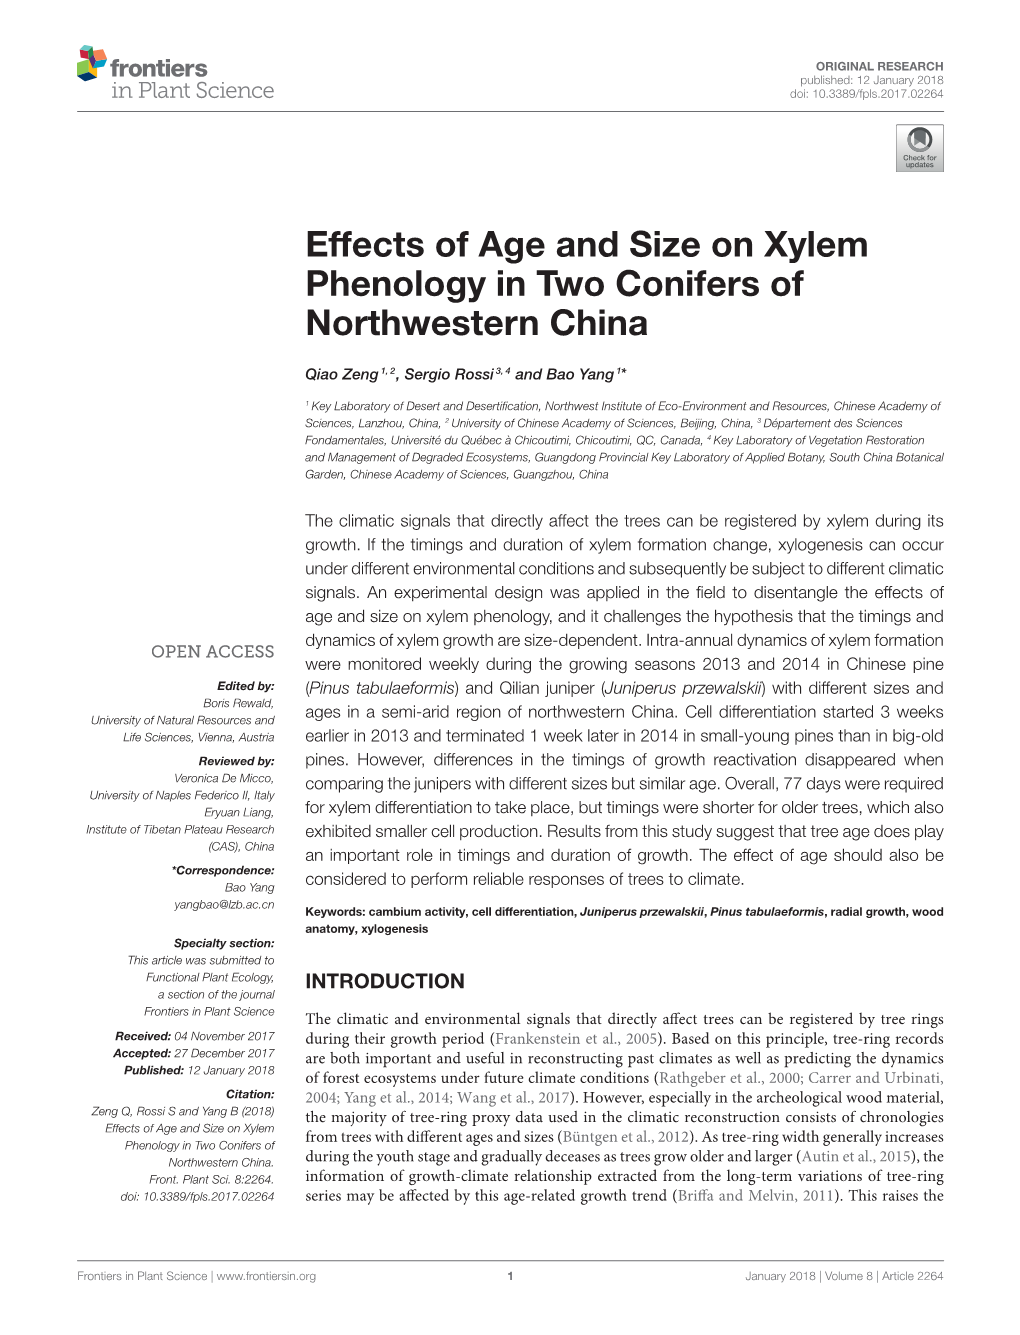 Effects of Age and Size on Xylem Phenology in Two Conifers of Northwestern China